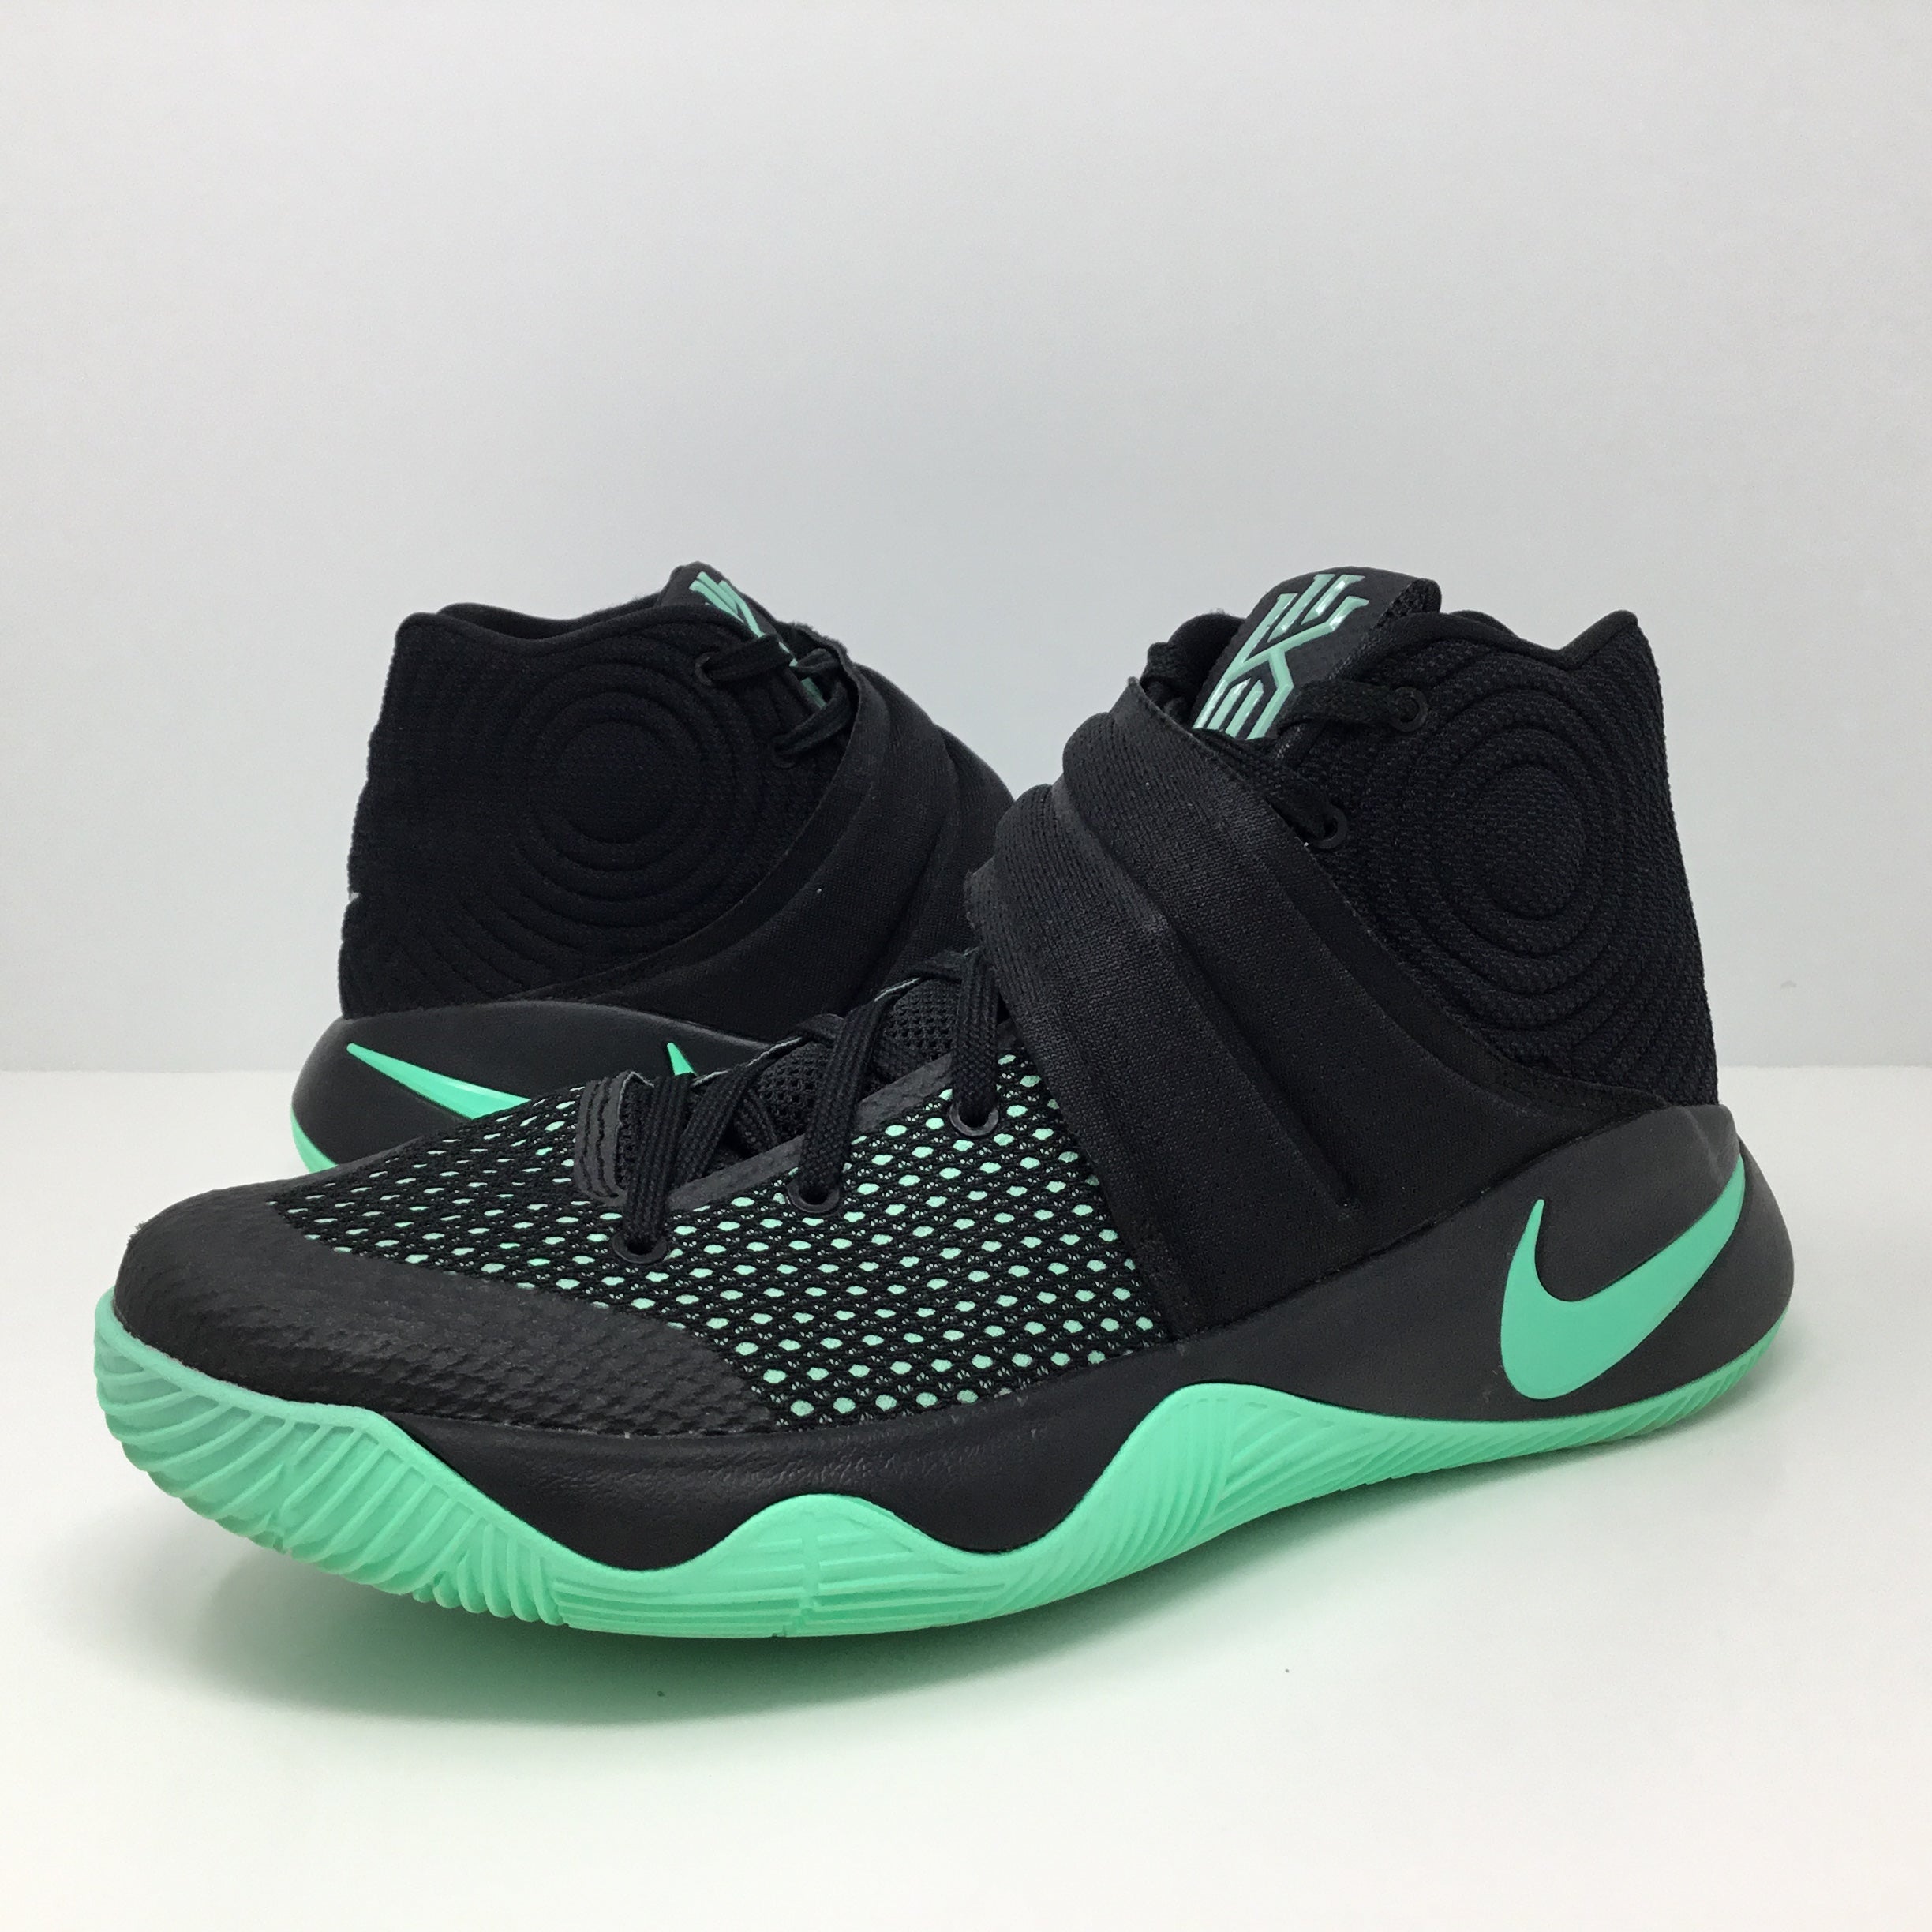 kyrie 2 size 9